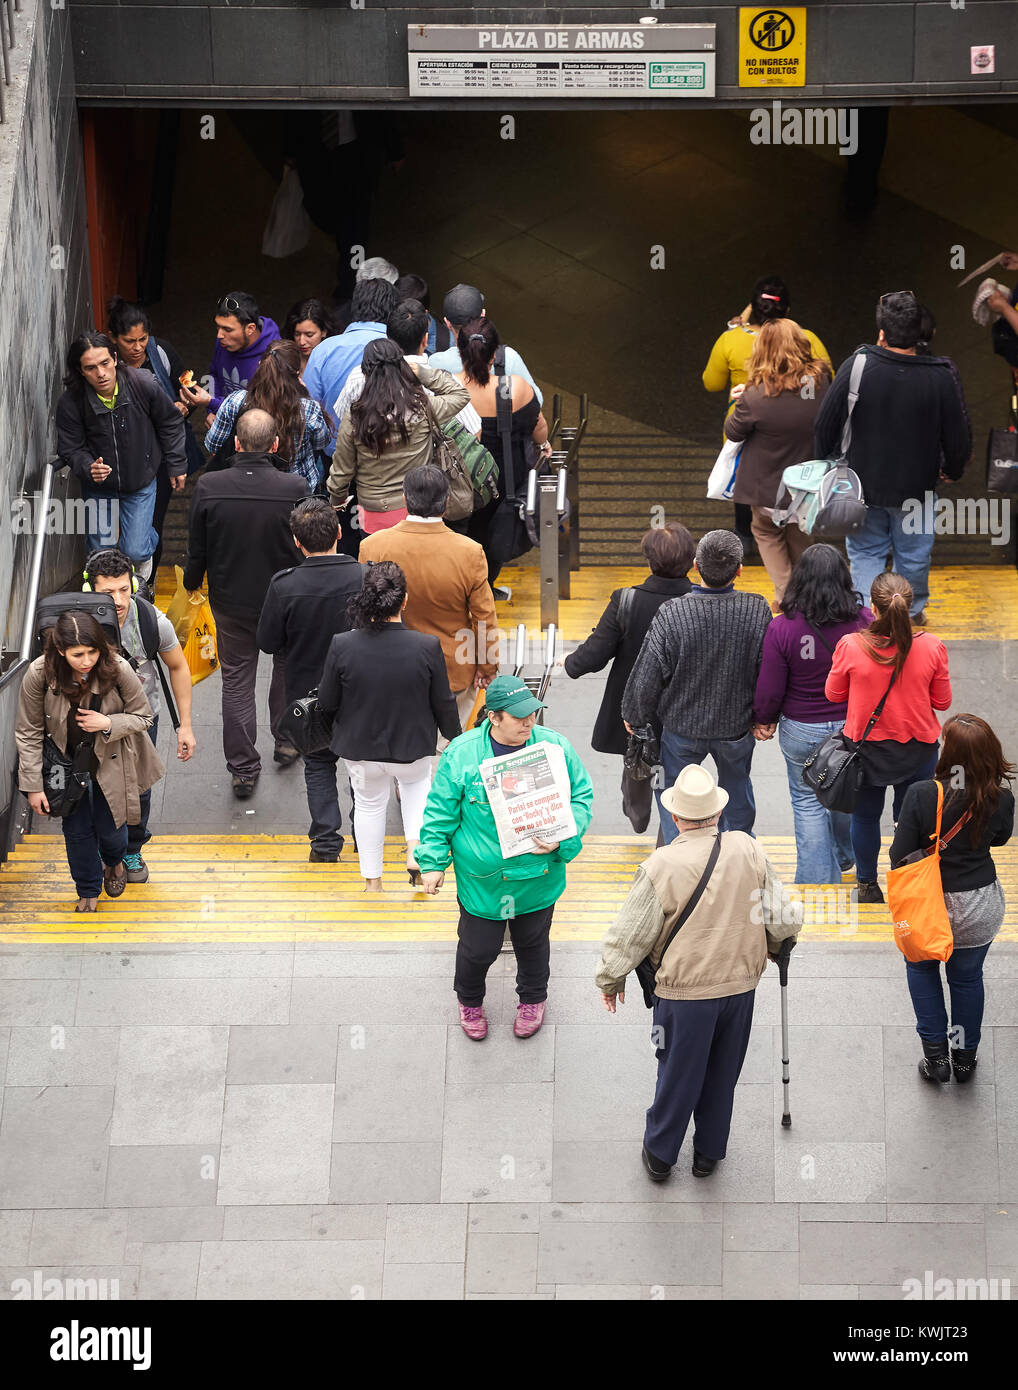 Santiago de Chile, Chile - October 24, 2013: People pass woman advertising La Segunda, Chilean afternoon daily newspaper. Stock Photo